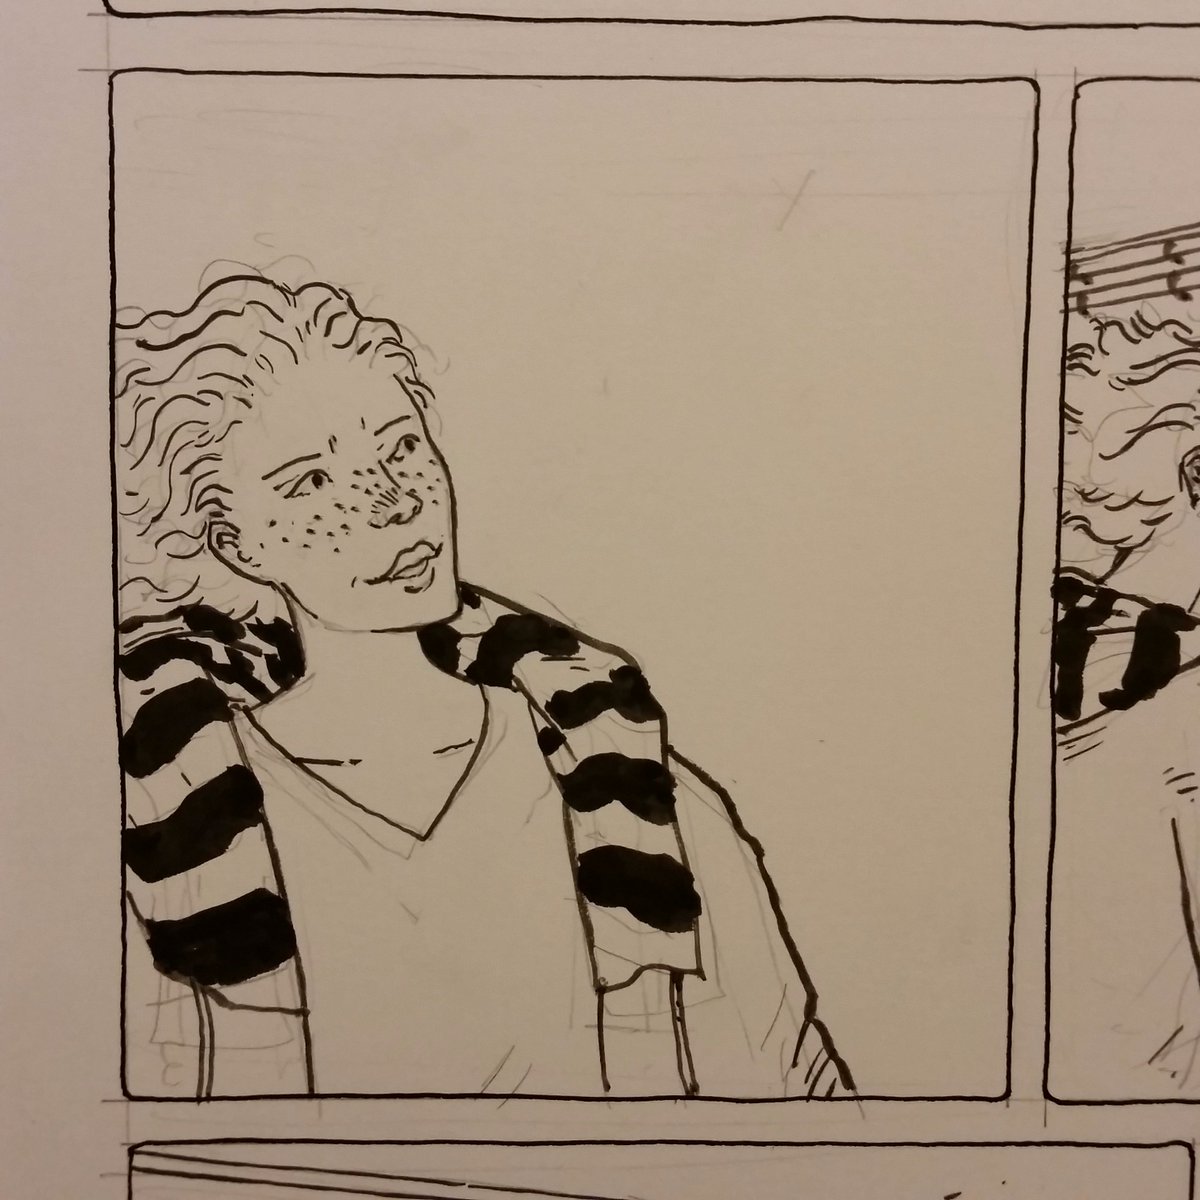 Inked panel from The Unsound. 